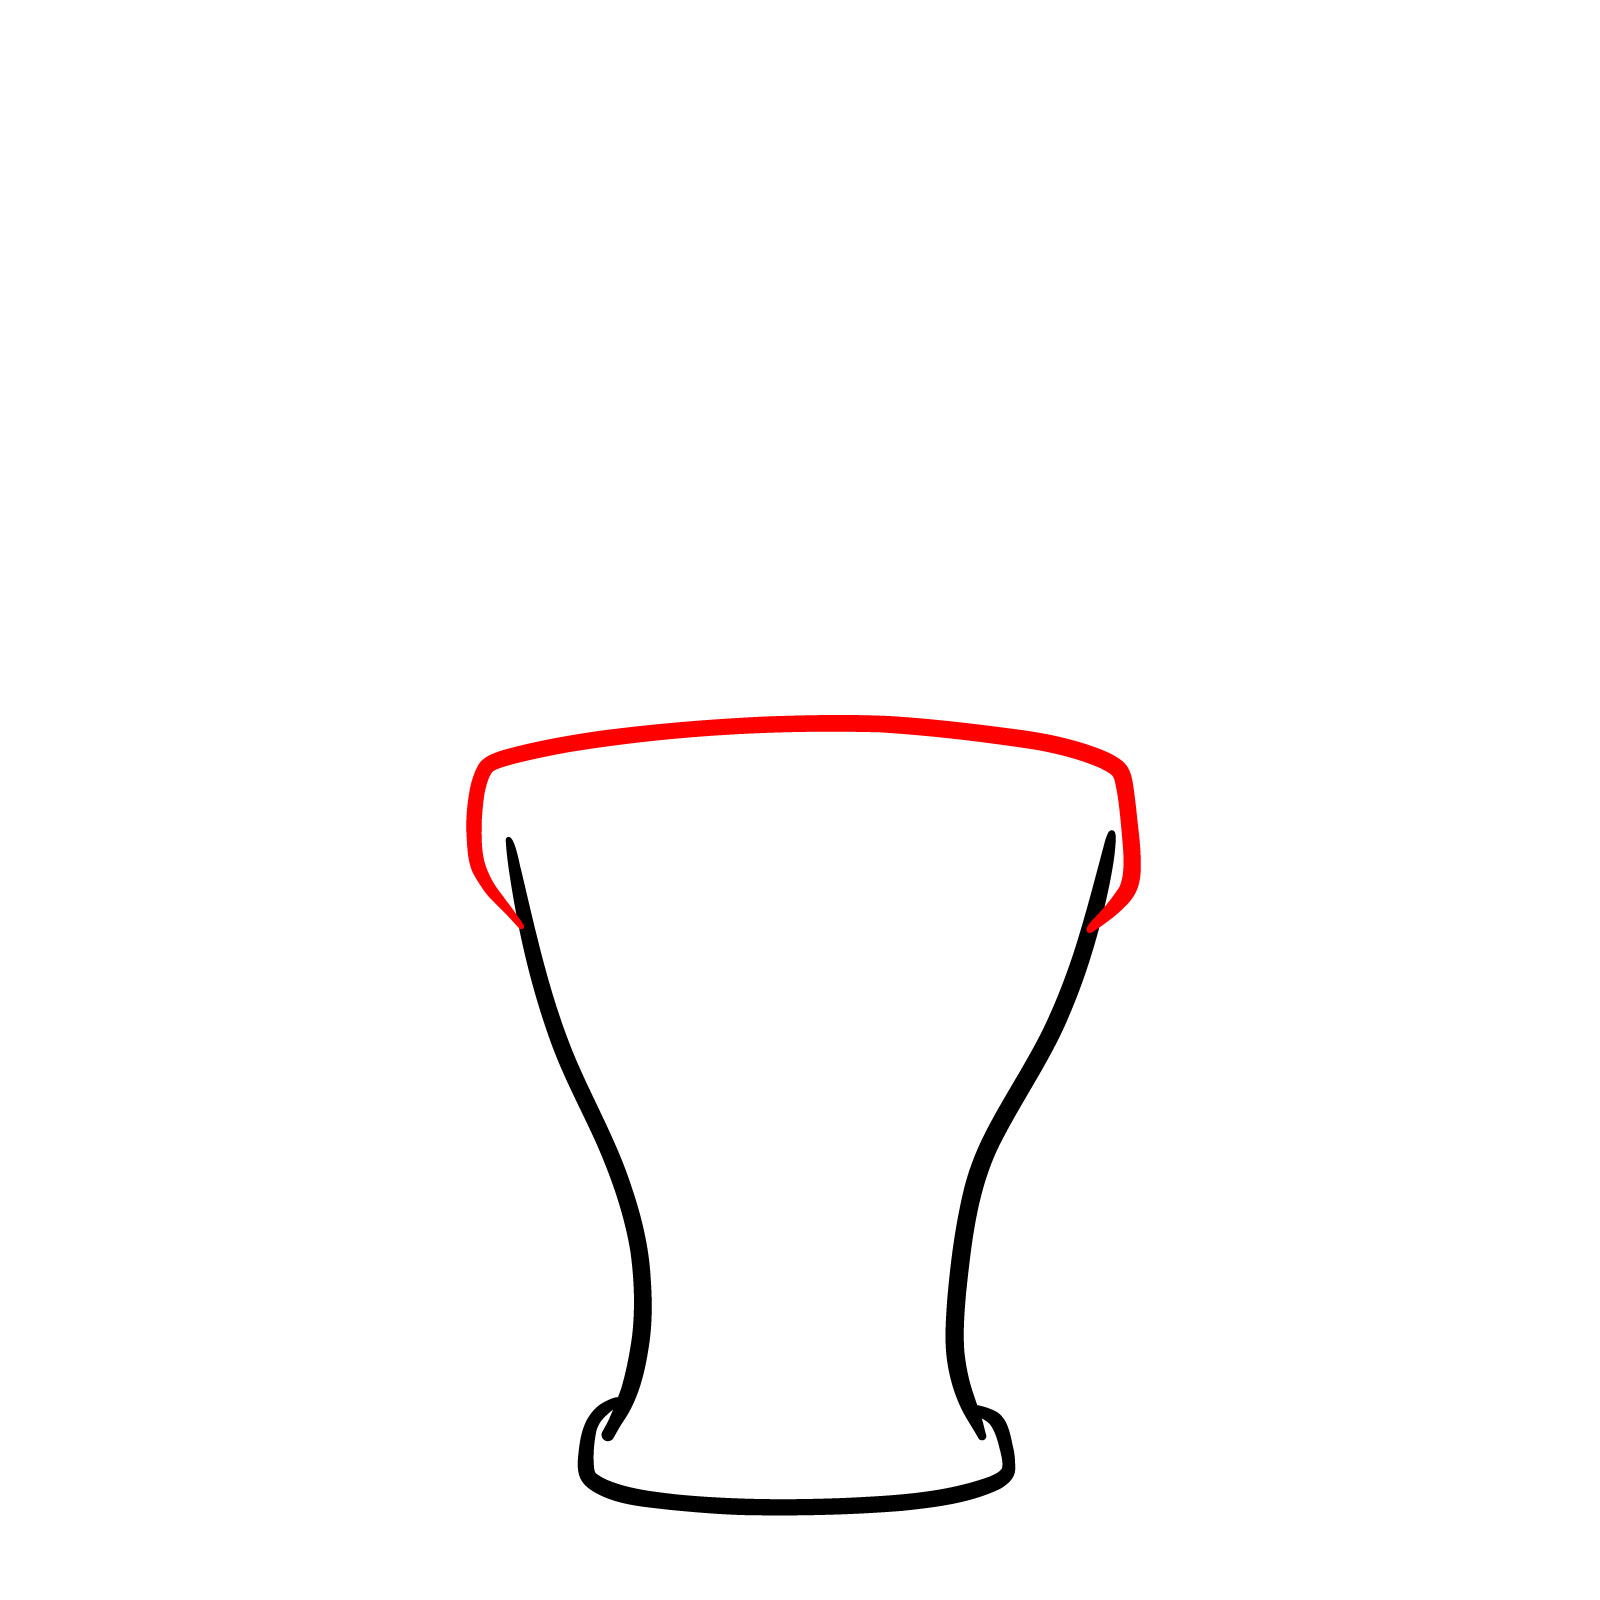 Sketching the upper segment of the toilet bowl - step 02